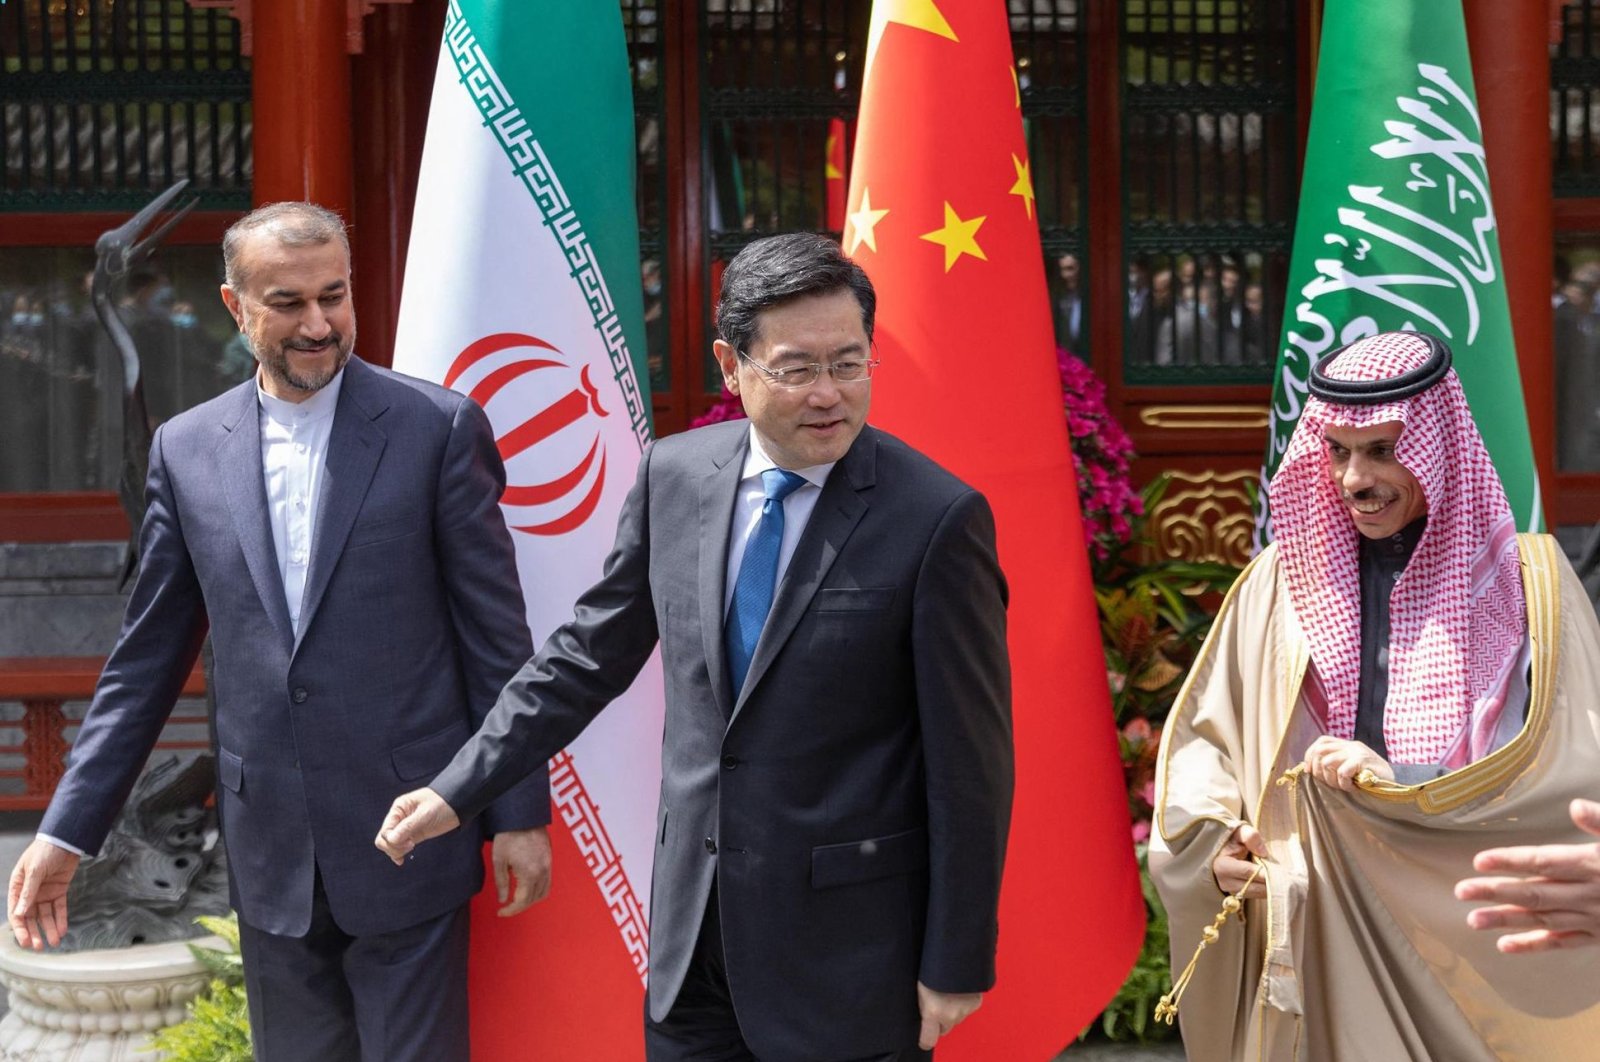 Iranian Foreign Minister Hossein Amir-Abdollahian (L) walking alongside Saudi Foreign Affairs Minister Prince Faisal bin Farhan (R) and Chinese Foreign Minister Qin Gang (C) during a meeting in Beijing, China, April 6, 2023. (AFP Photo)